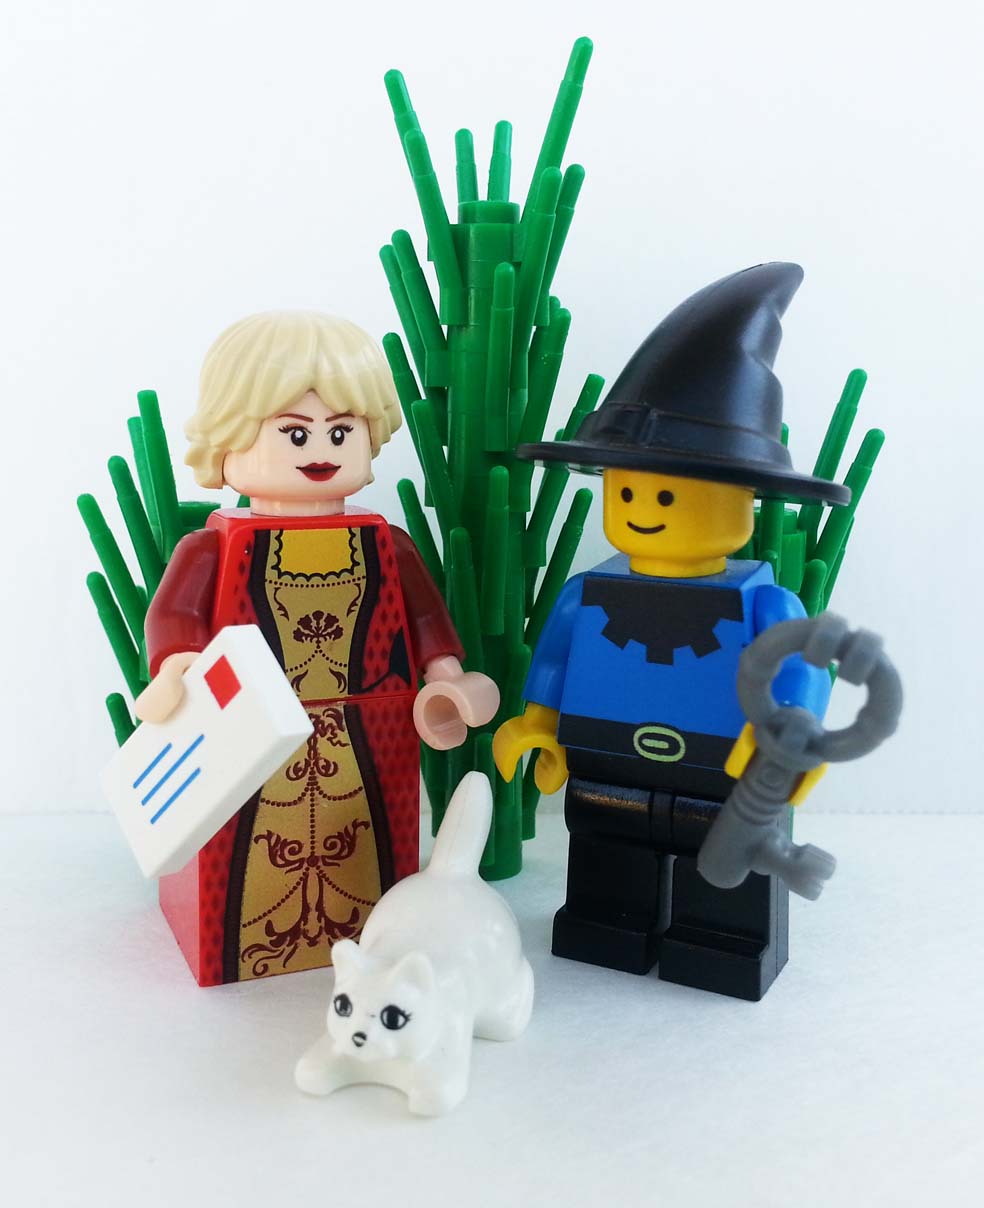 LEGO of Daniel and his mother.